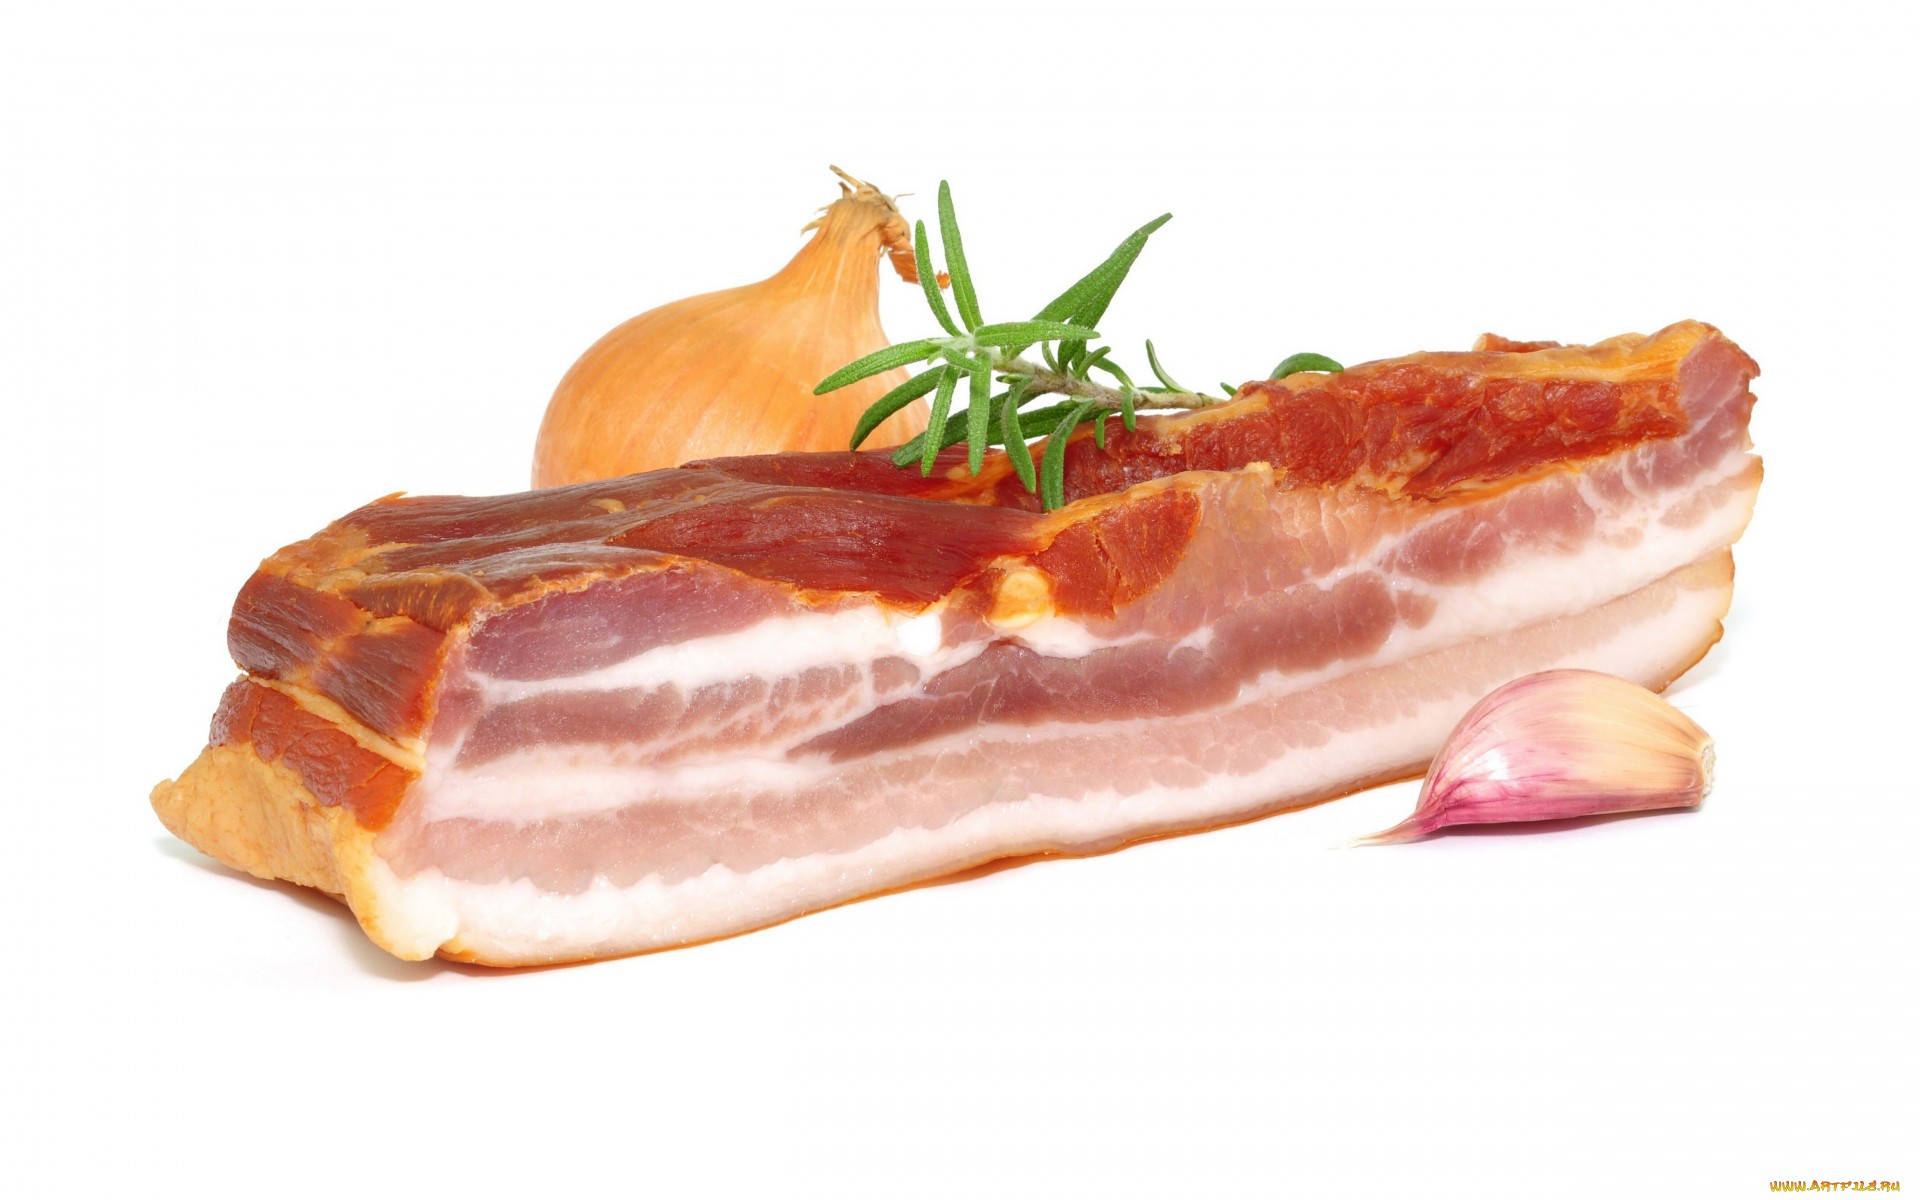 Uncut And Raw Bacon Meat With Onion Wallpaper